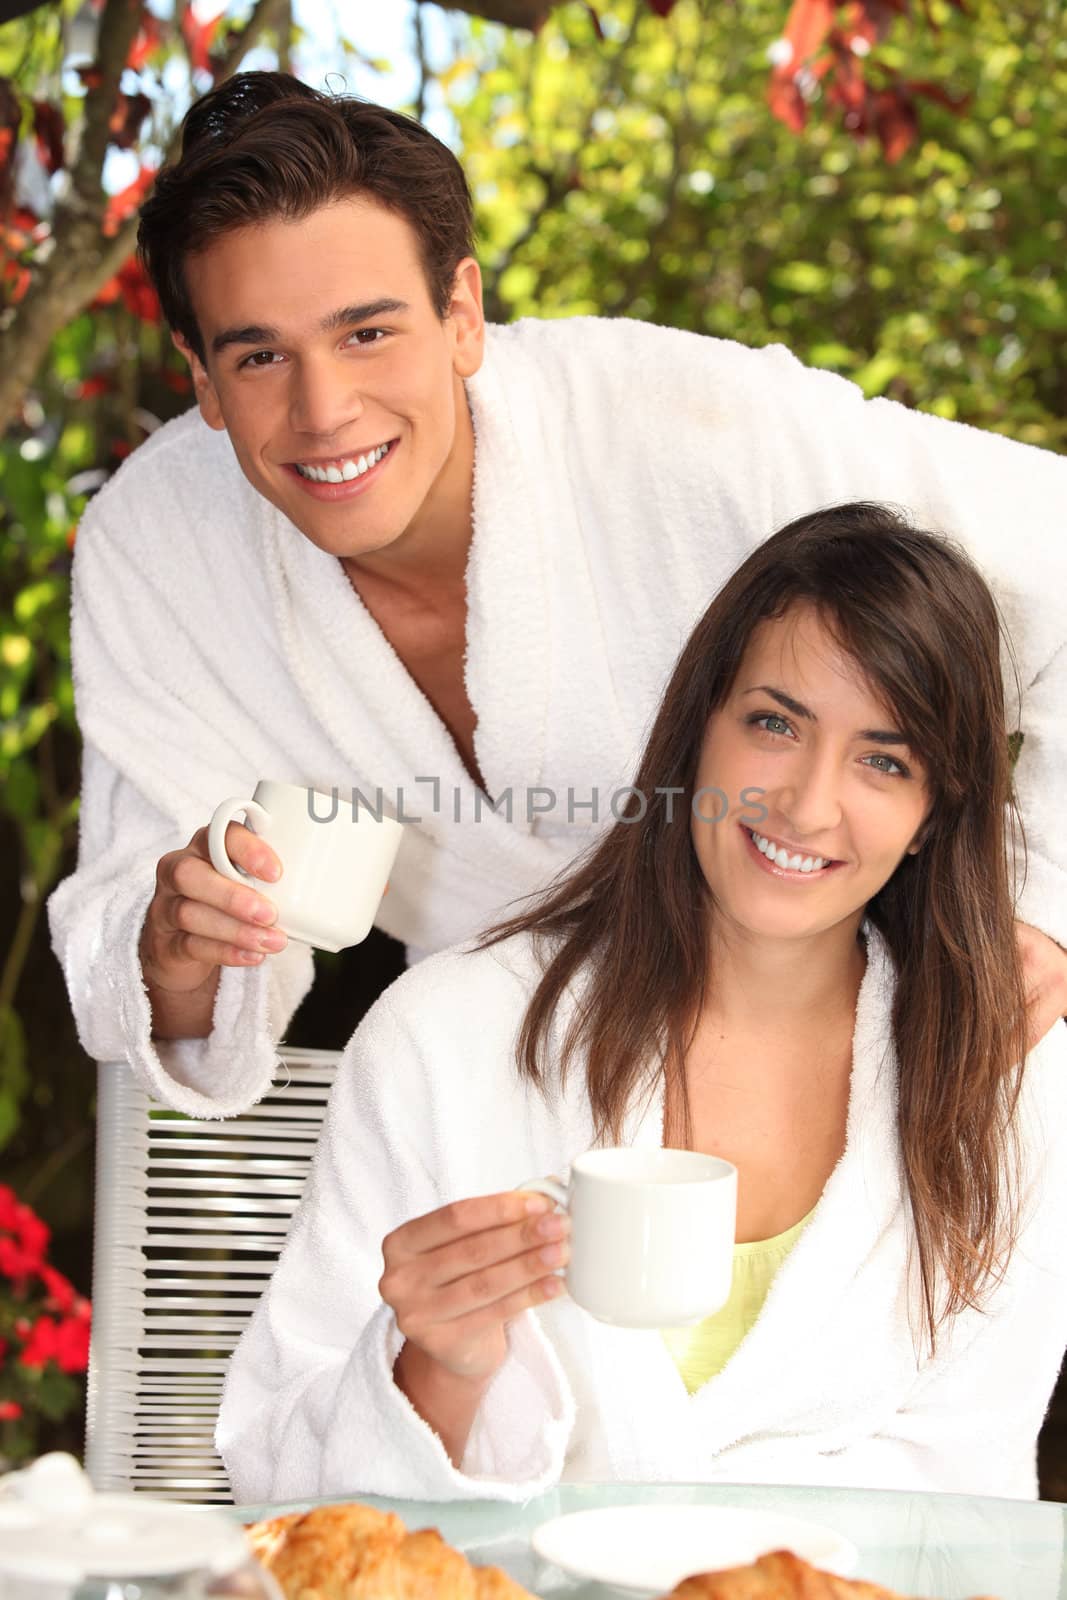 young couple having breakfast outdoors